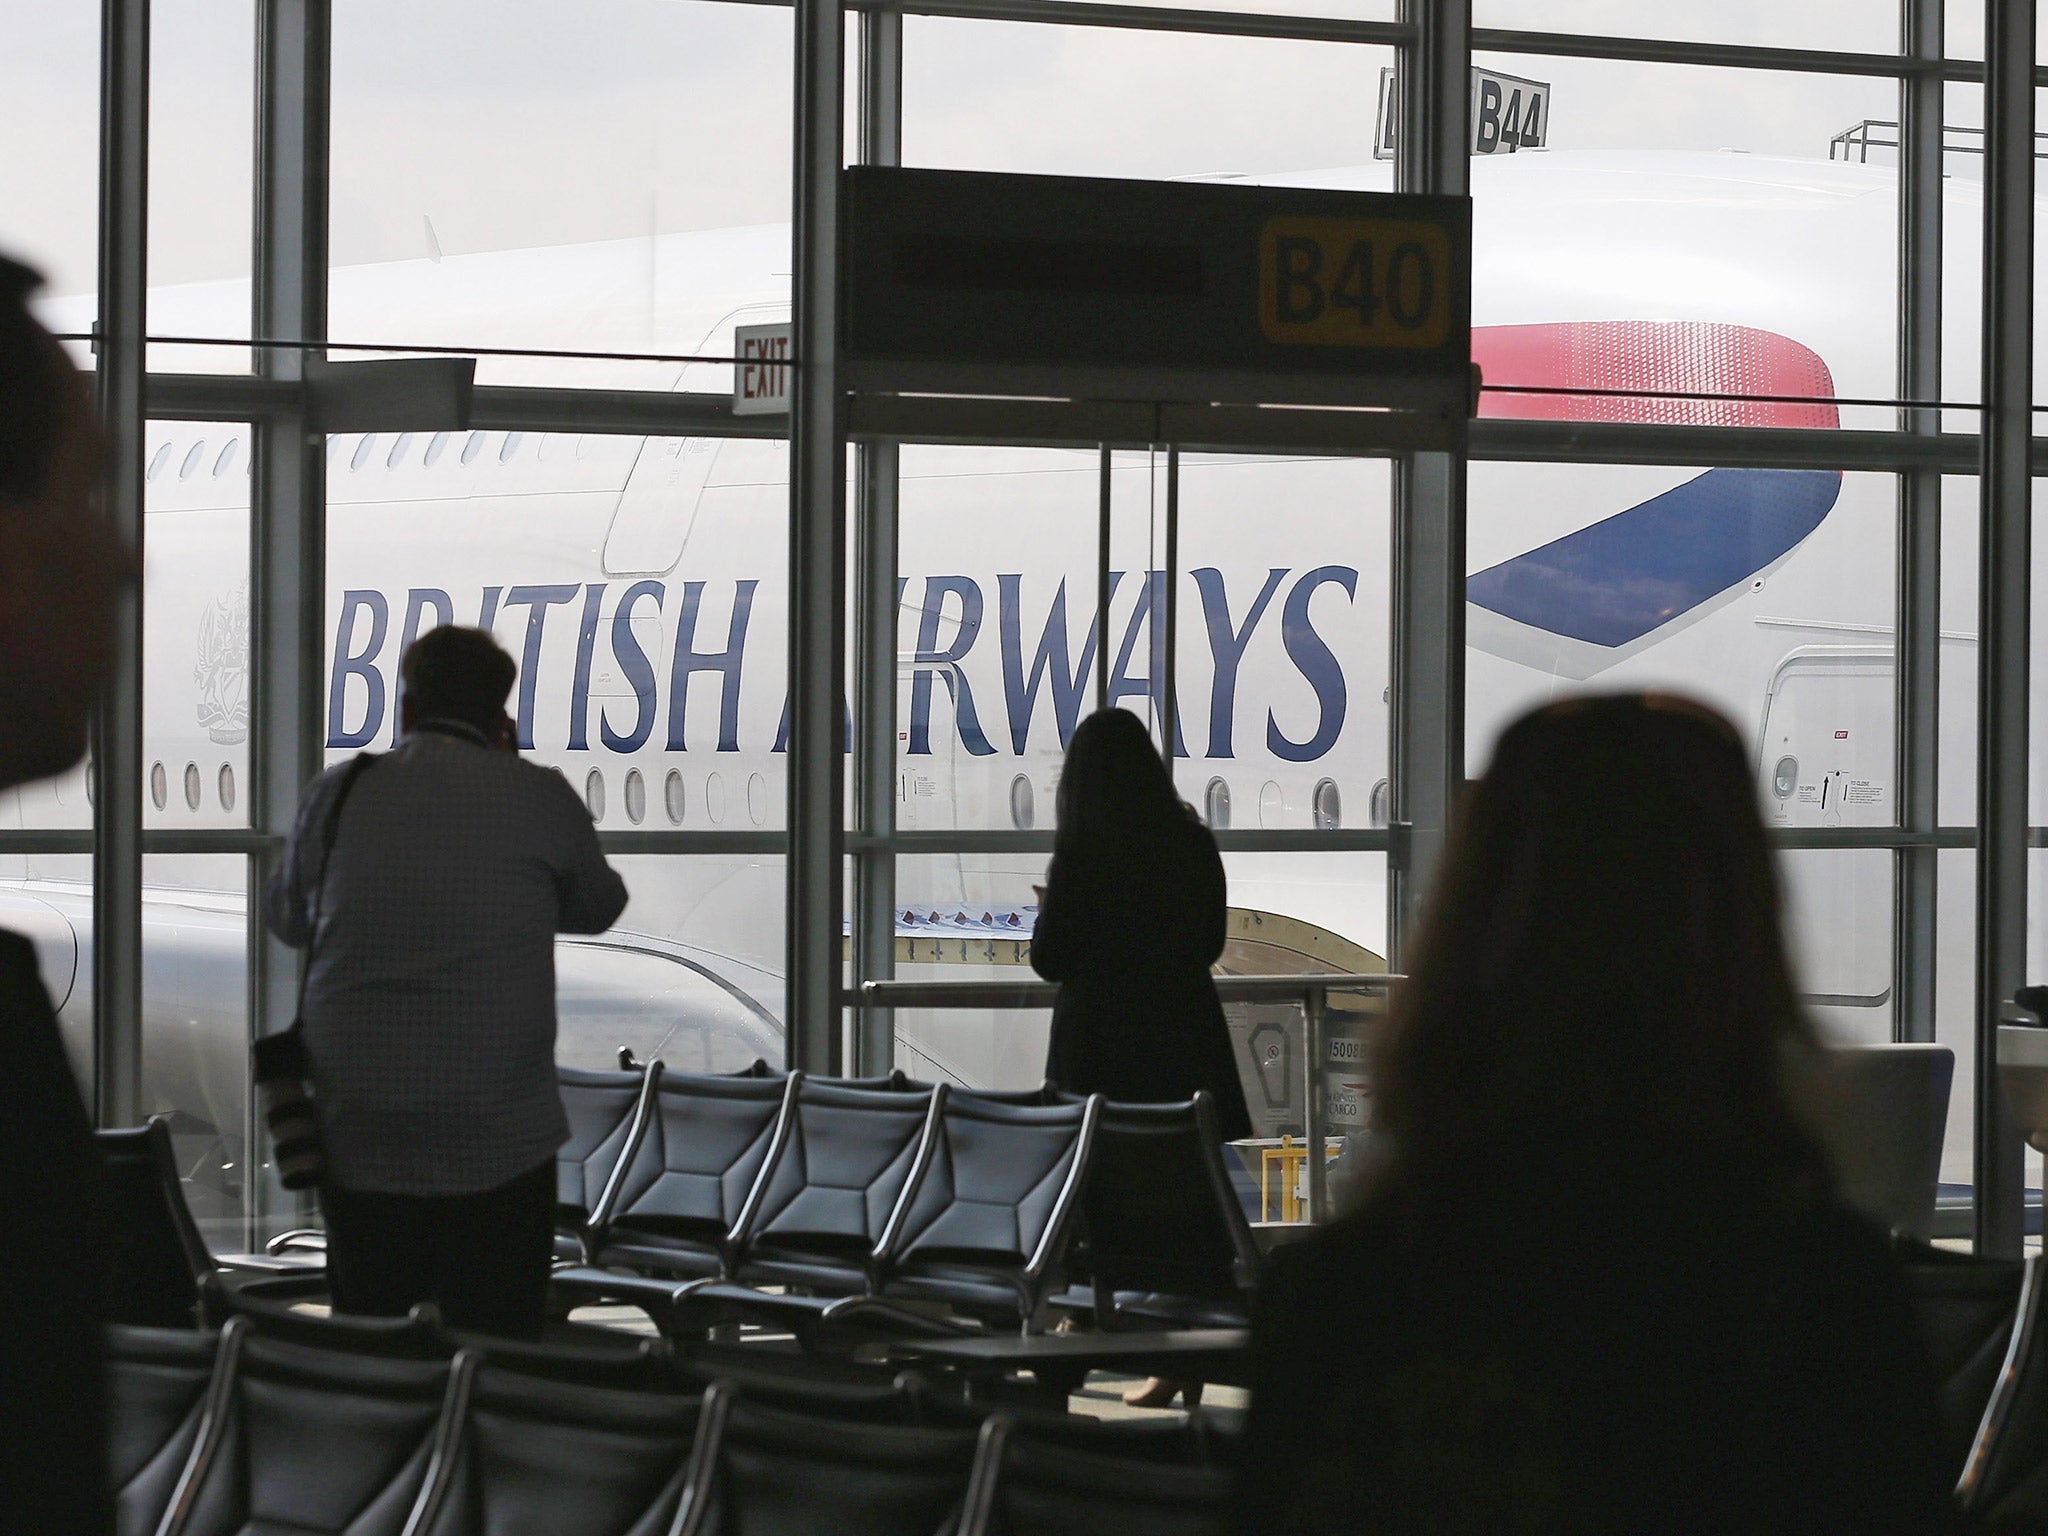 The action British Airways took in barring passengers contradicts the advice offered by the Foreign Office